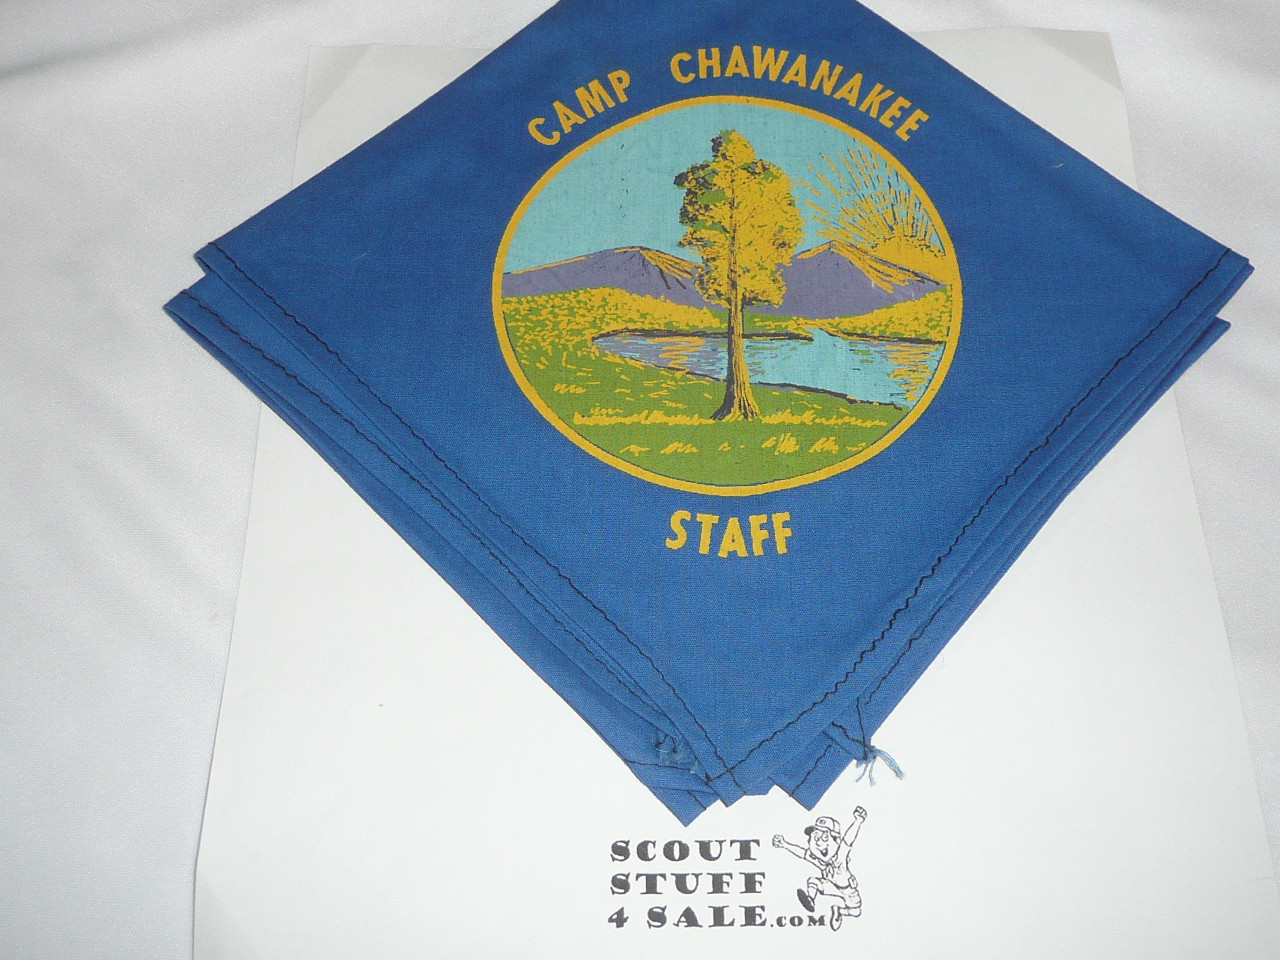 Camp Chawanakee Staff Neckerchief, Sequoia Council, blue